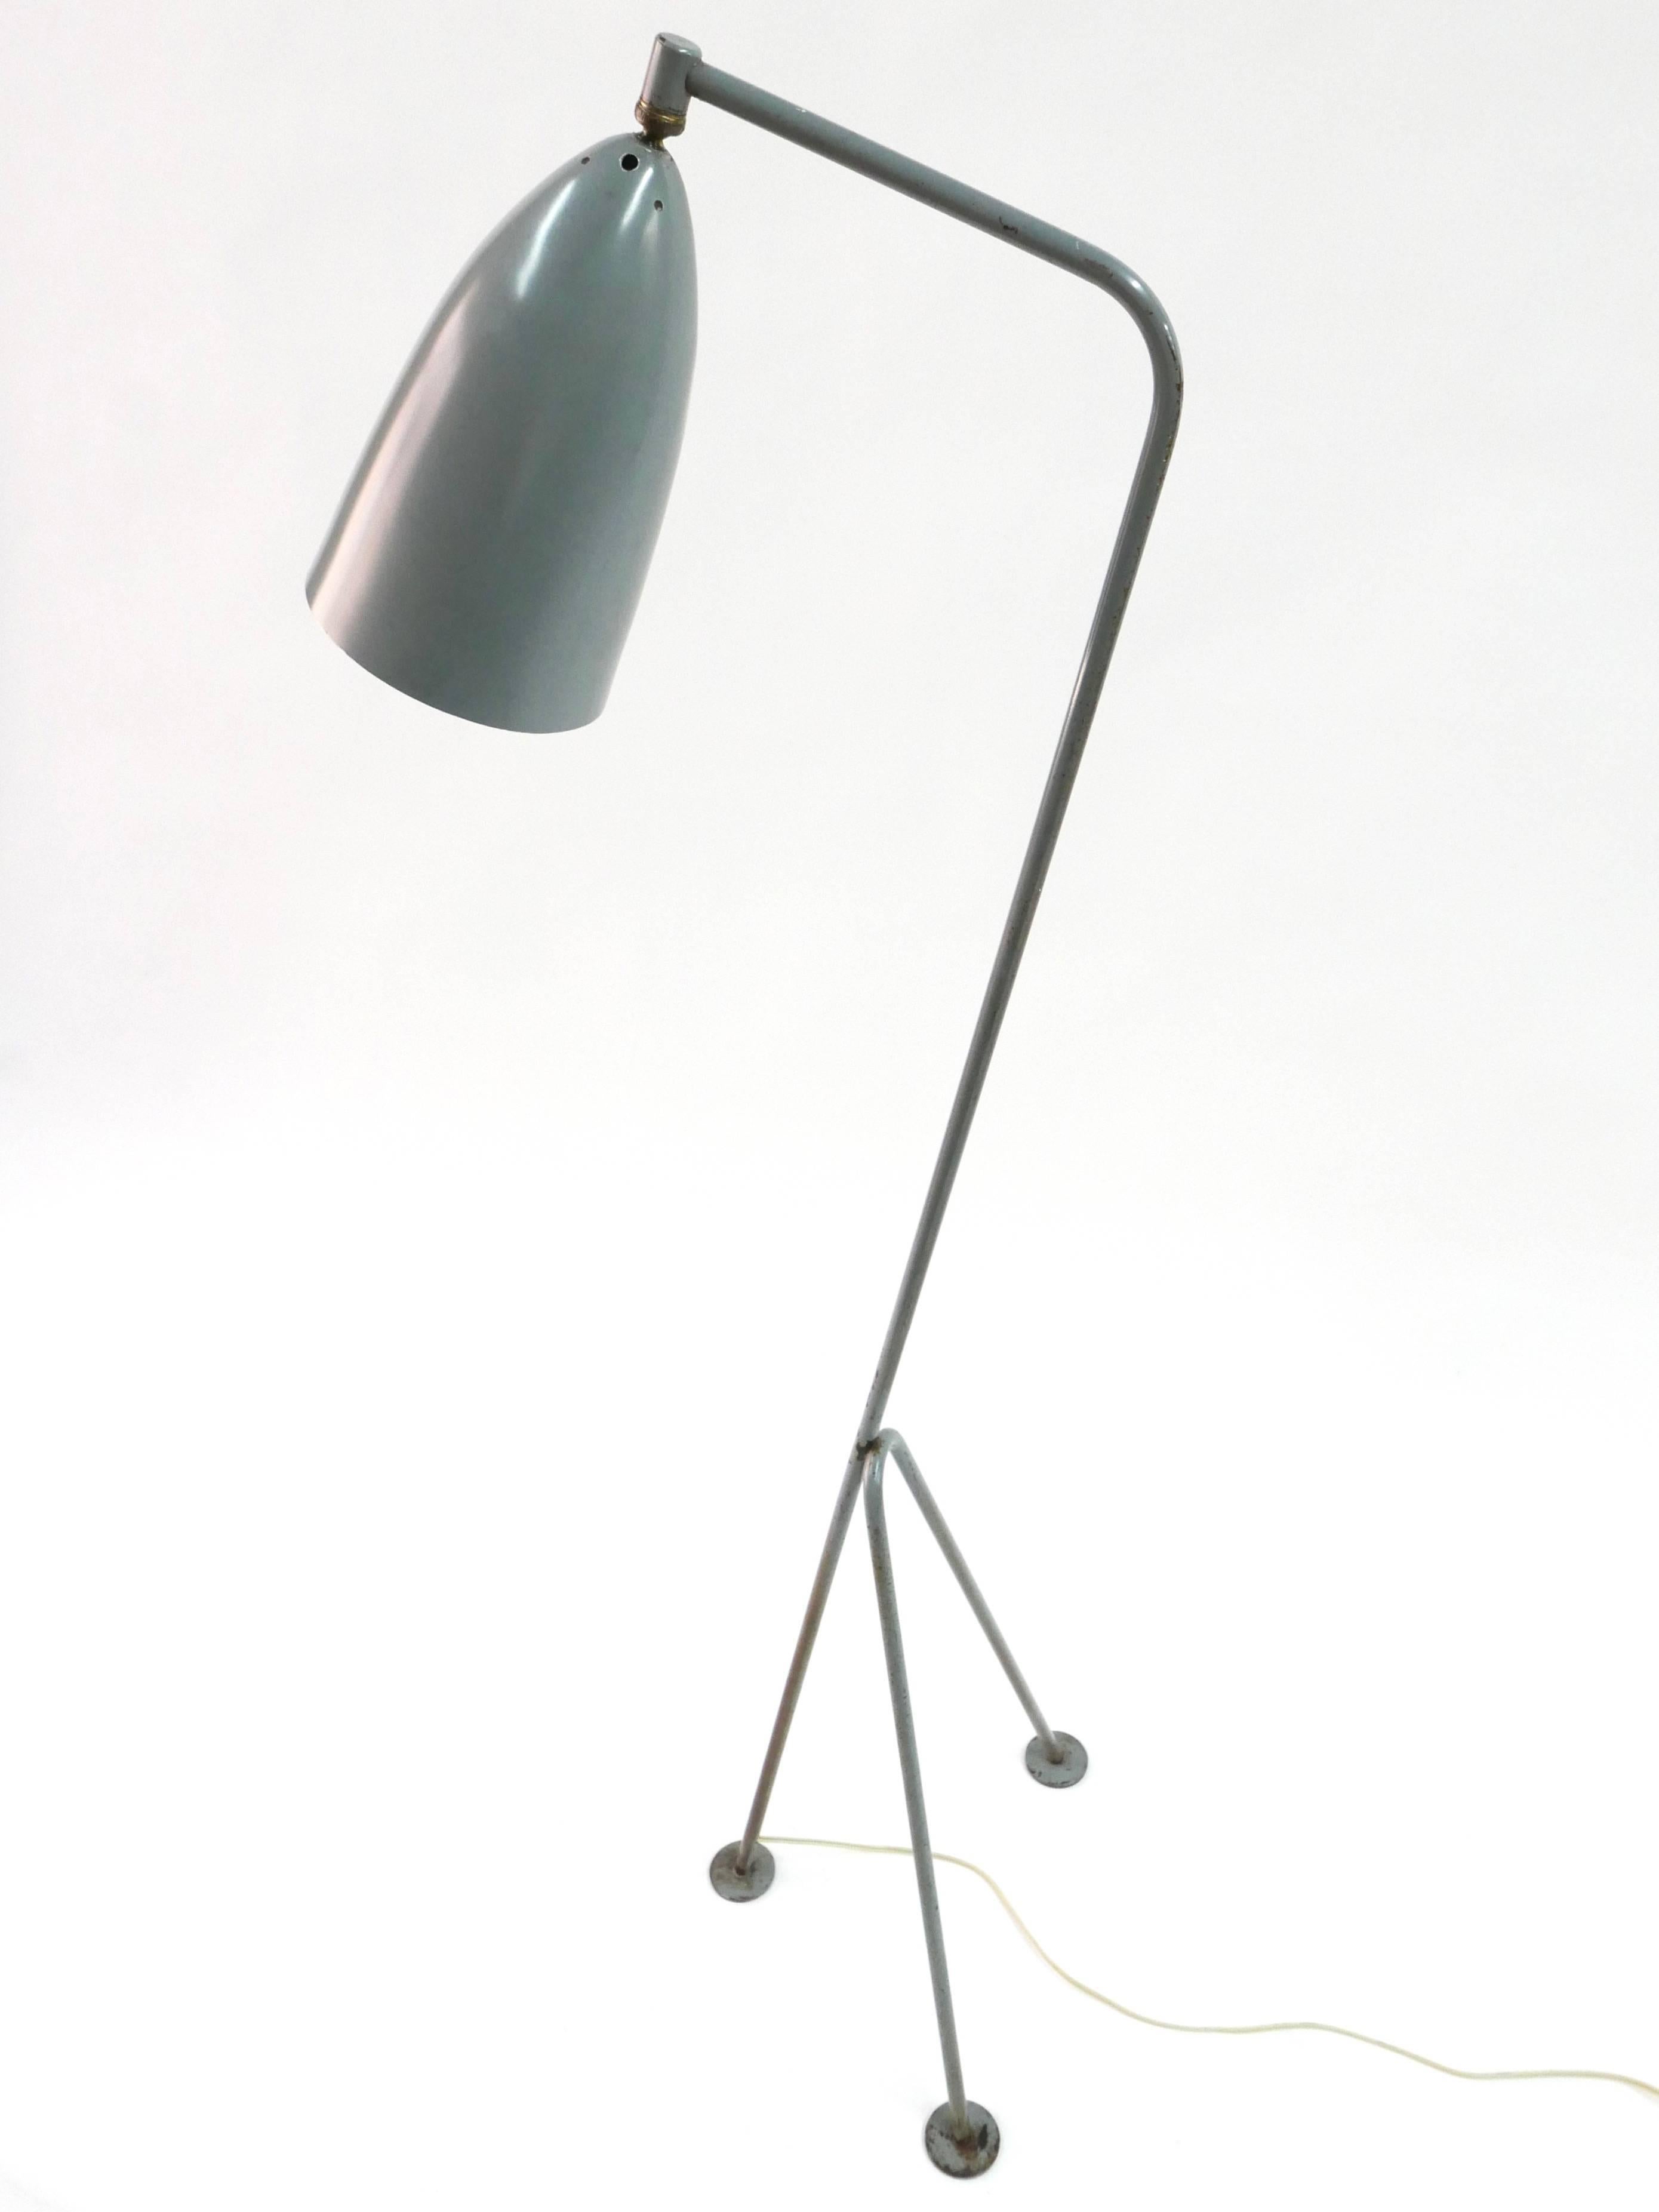 Grasshopper floor lamp designed by Greta Magnusson Grossman for Ralph O. Smith in 1947. A fine original example with even patina to the enameled frame.